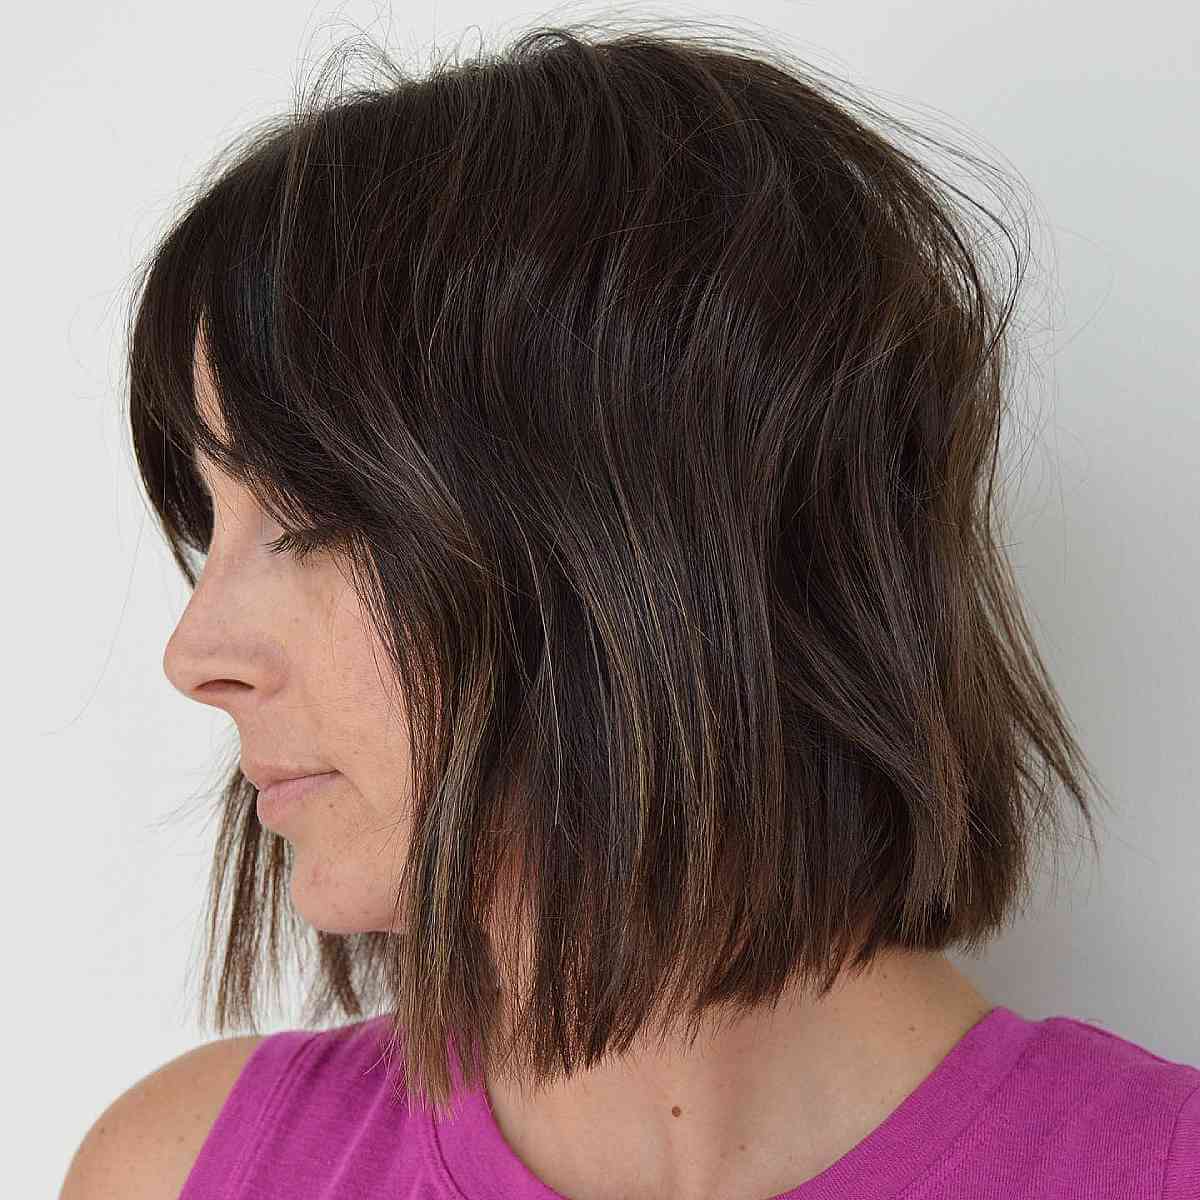 Textured Neck-Length Blunt Cut with a Fringe